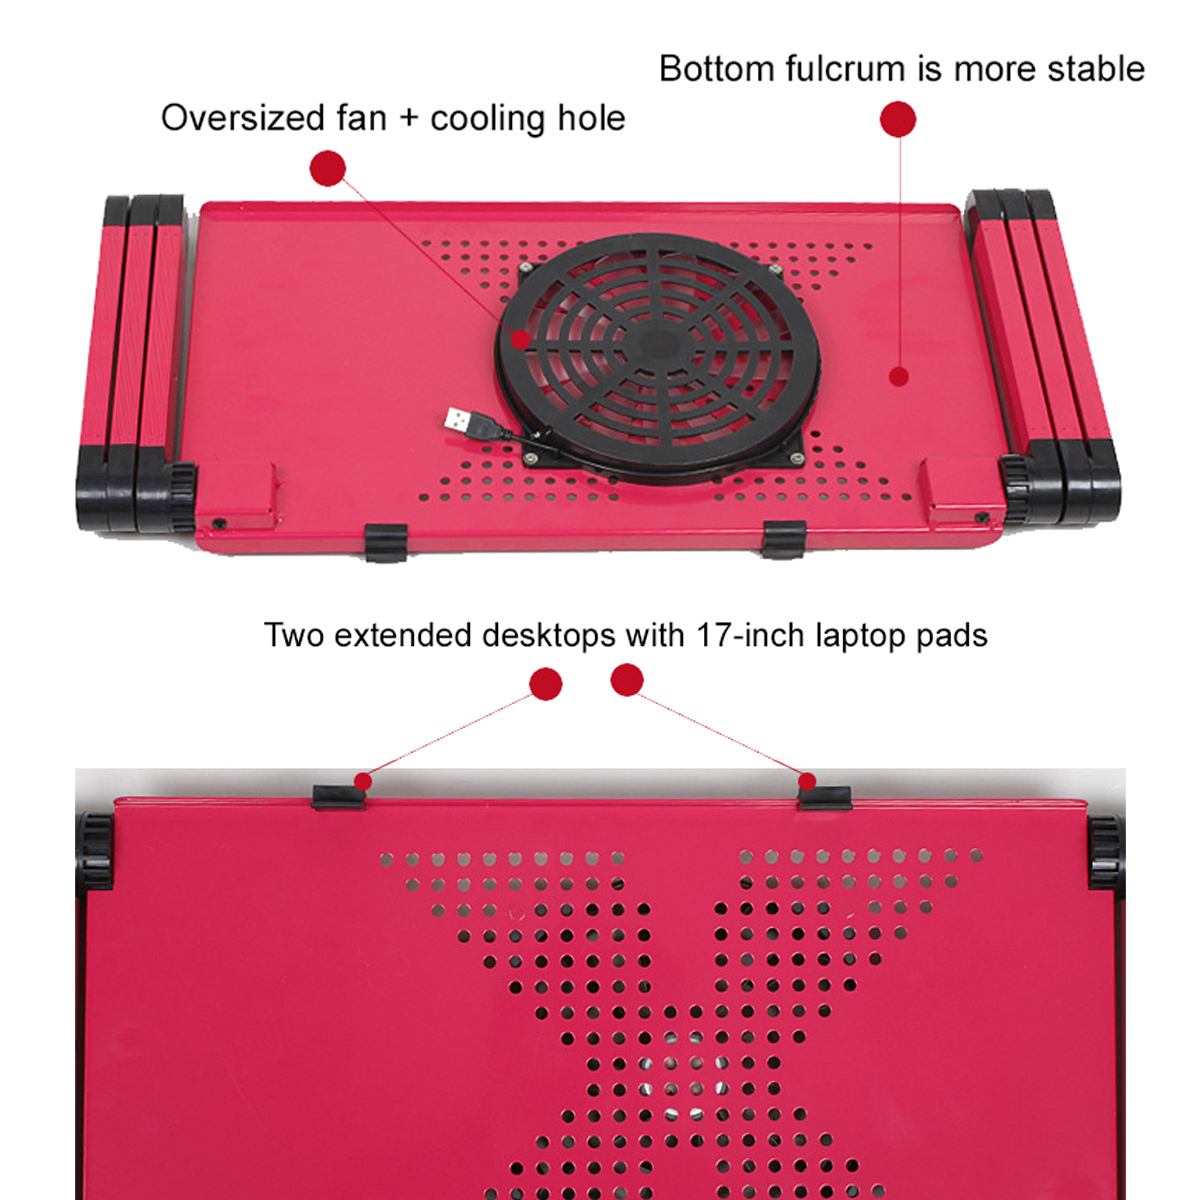 Adjustable Laptop Stand Desk Notebook Bracket Fan Cooling Pad Game Notebook Base with Mouse Board for below 17